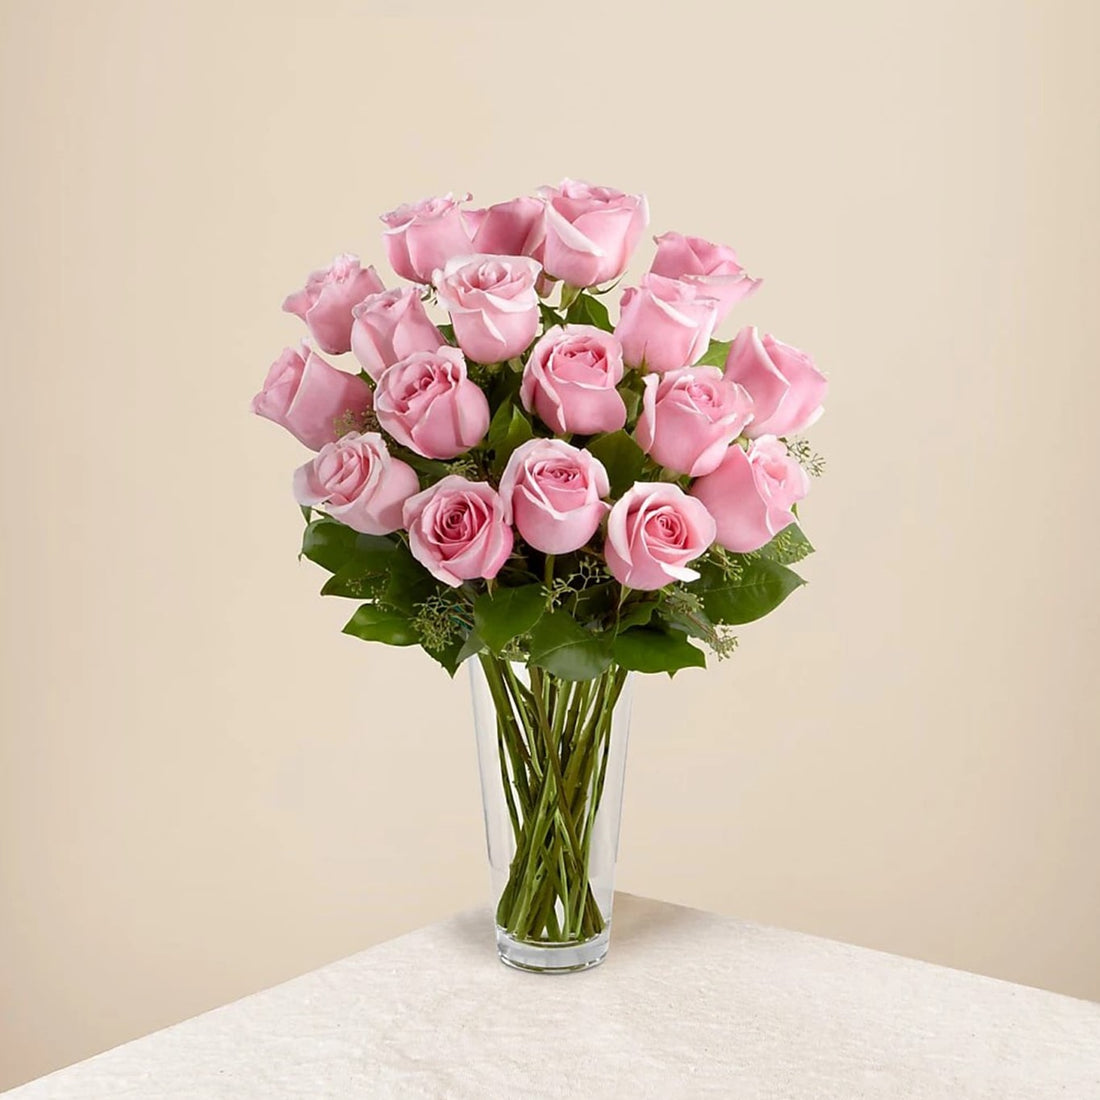 Pink Roses Bouquet or Vase, flowers for home decoration with pink roses, it is a beautiful gift for anniversary, flower gift for birthday, flowers for all occasions and decoration, Fresh Flowers Orlando.